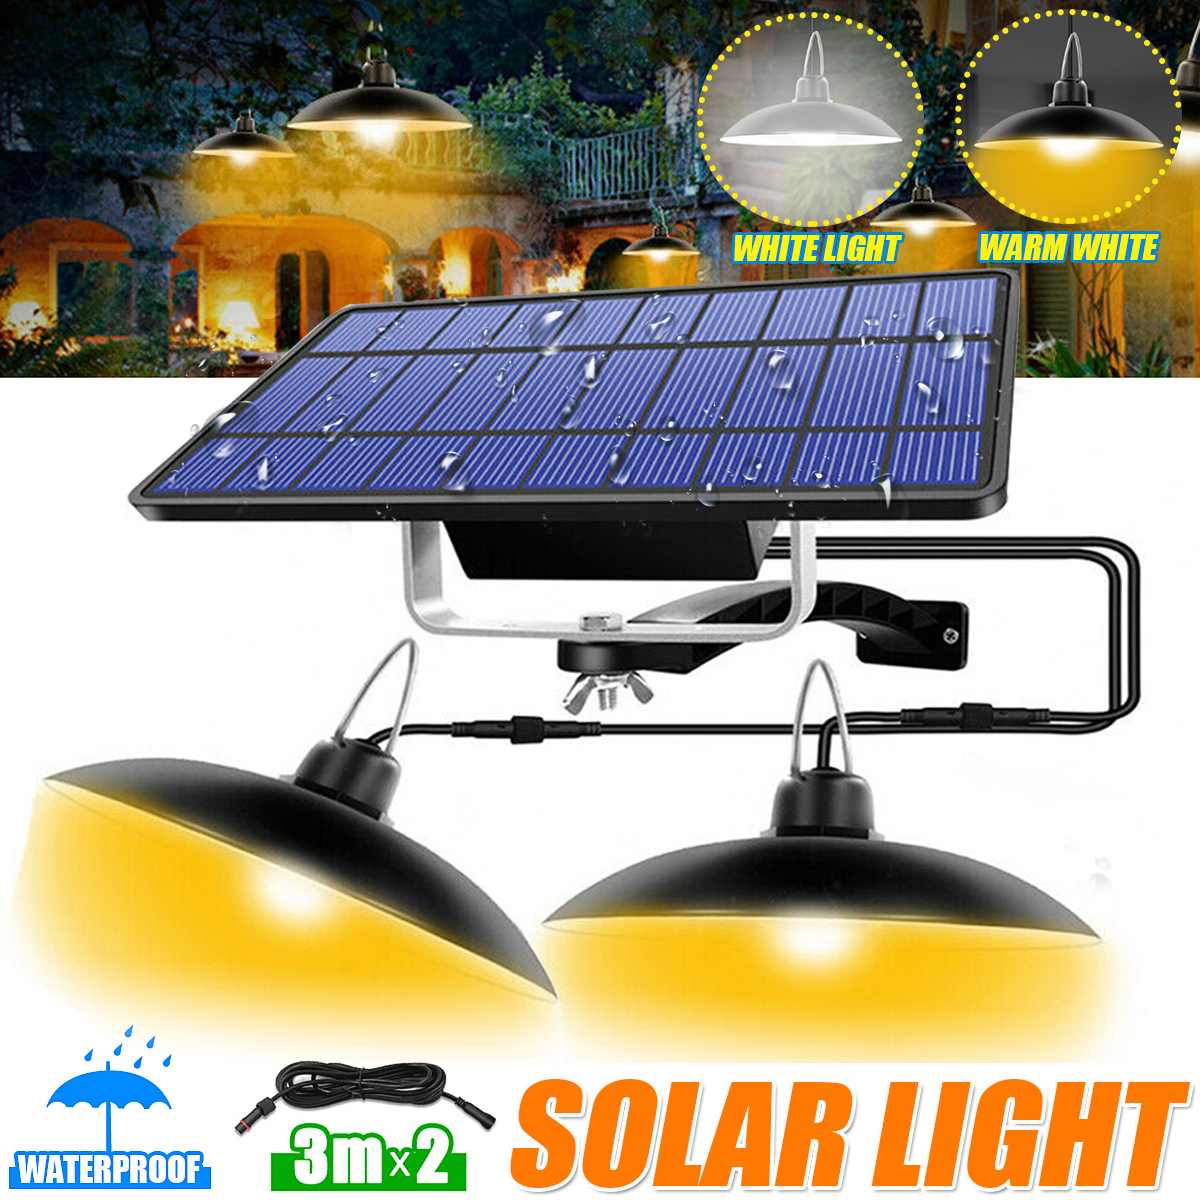 NEW Double Head Solar Pendant Light Outdoor Indoor Solar Lamp With Line Warm White/White Lighting For Camping Garden Yard